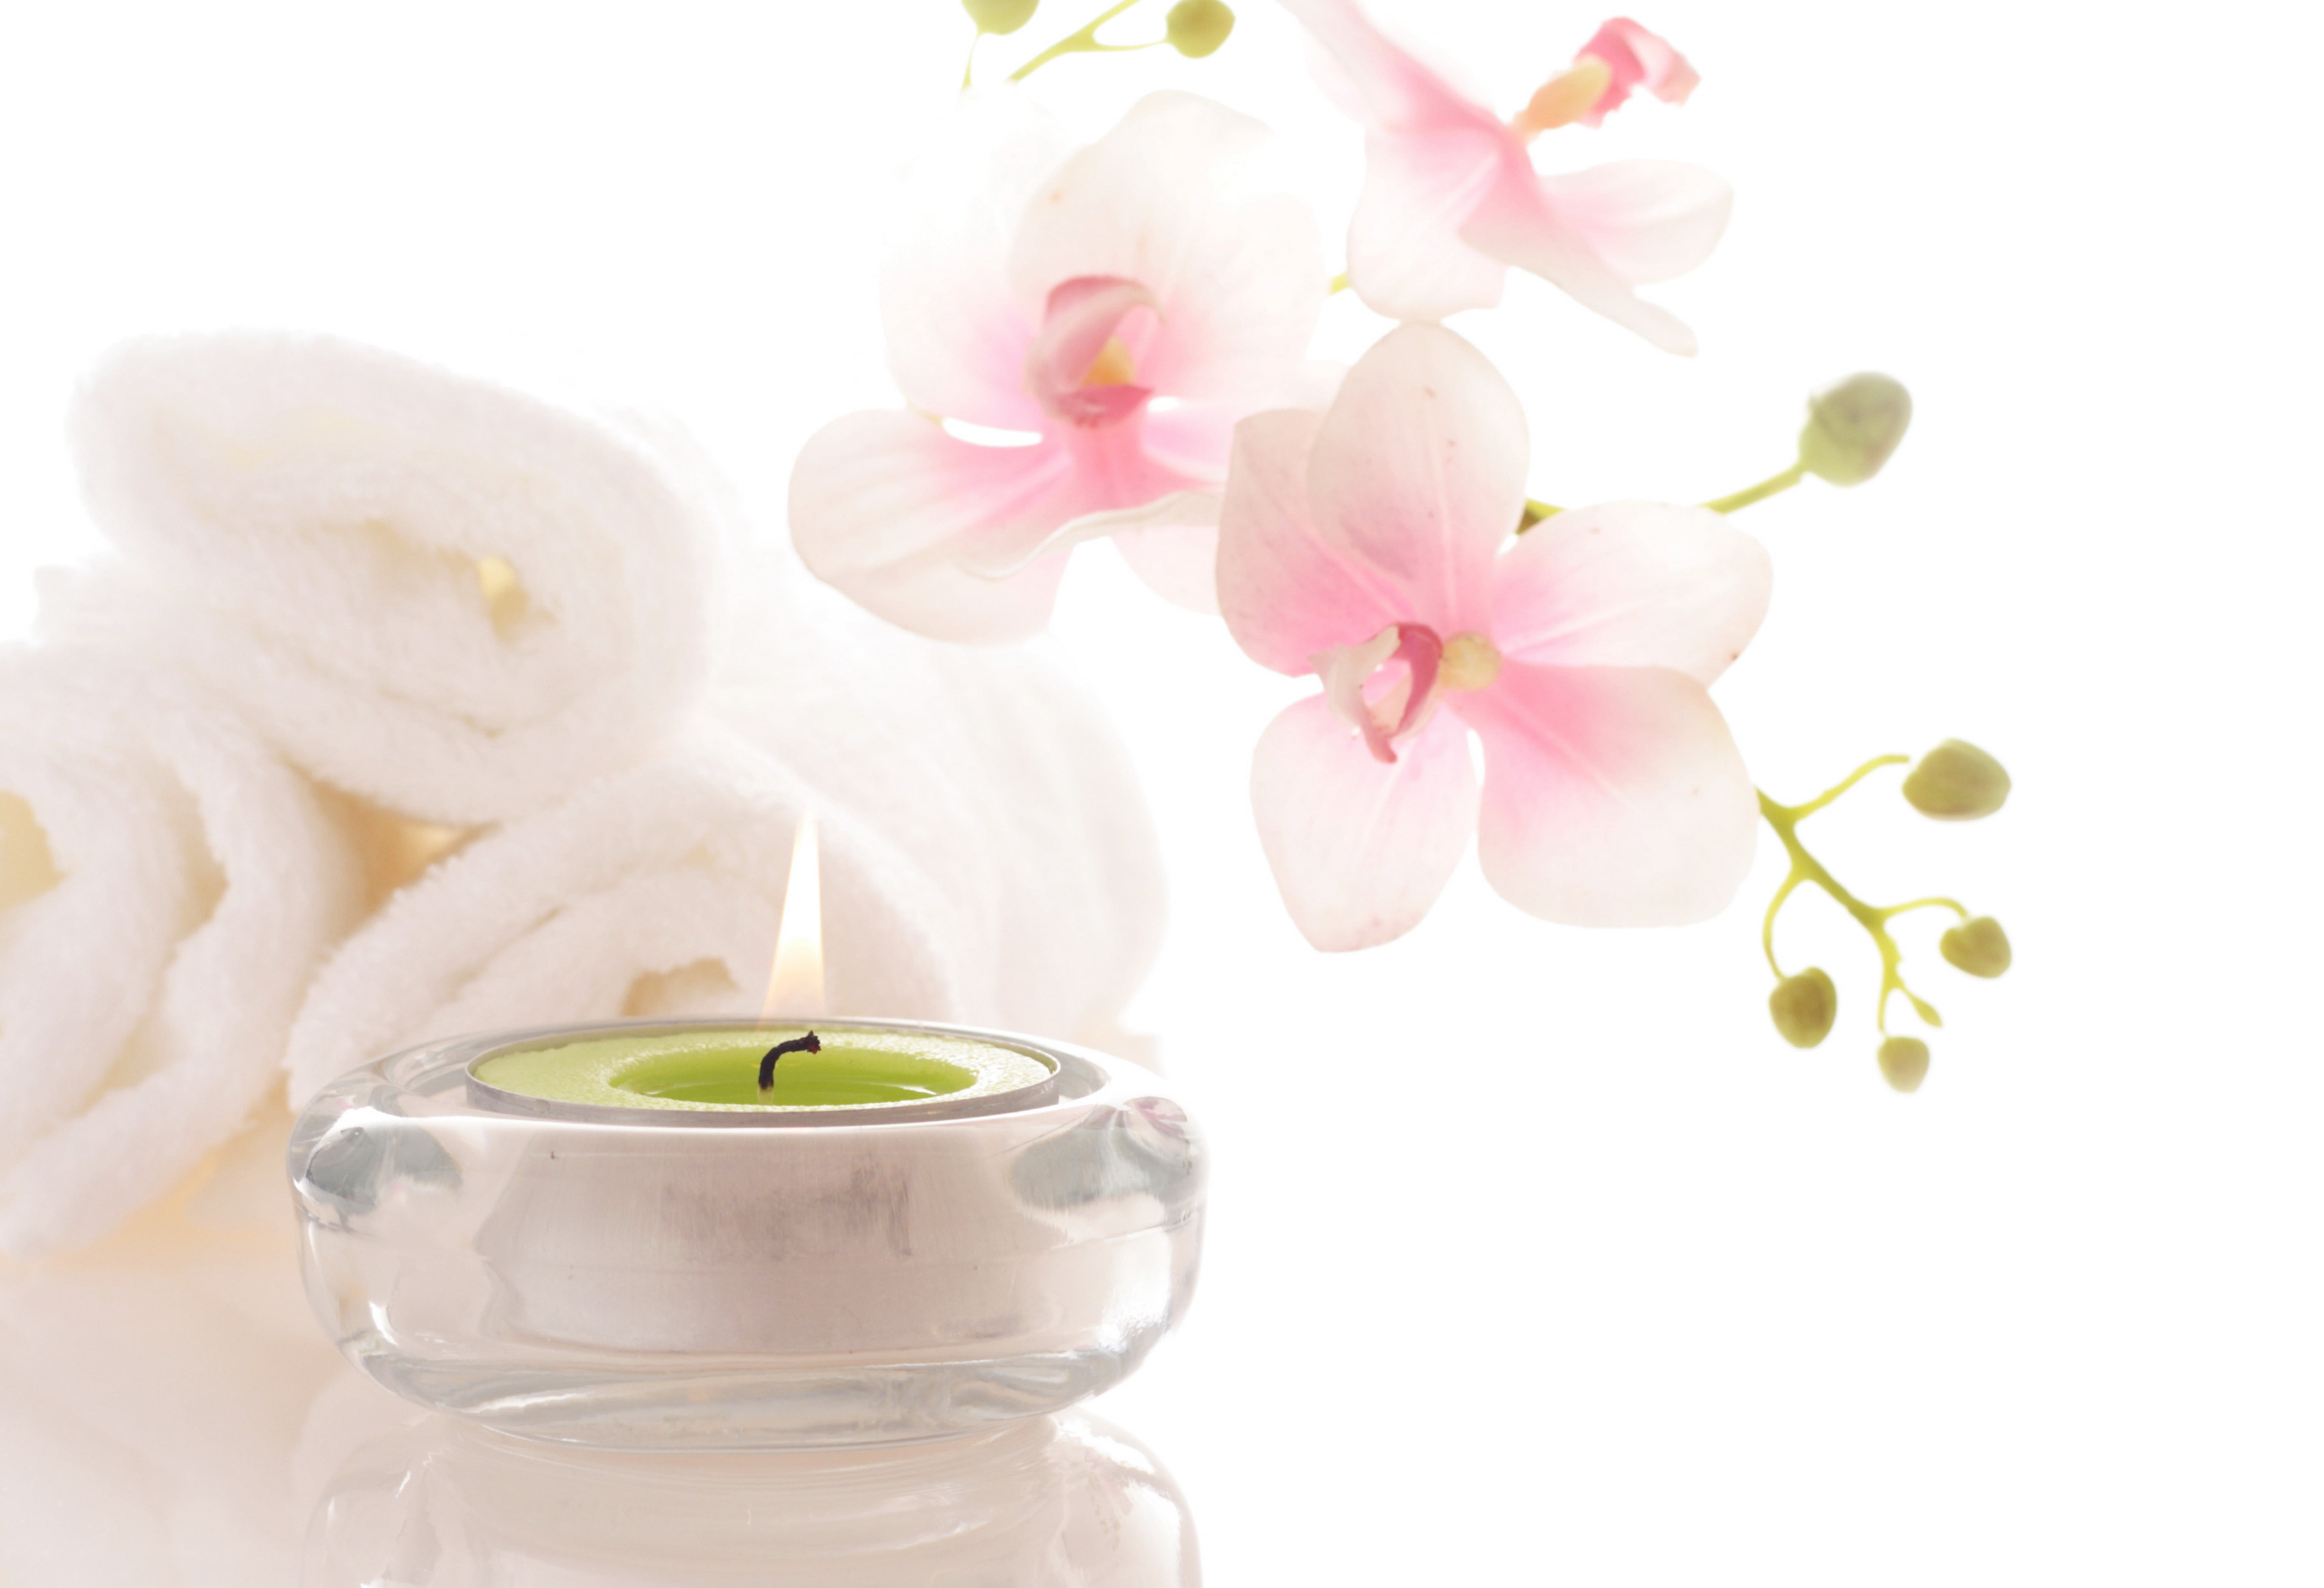 green candle, towel, Spa, pink Orchid, spa Treatment, relaxation